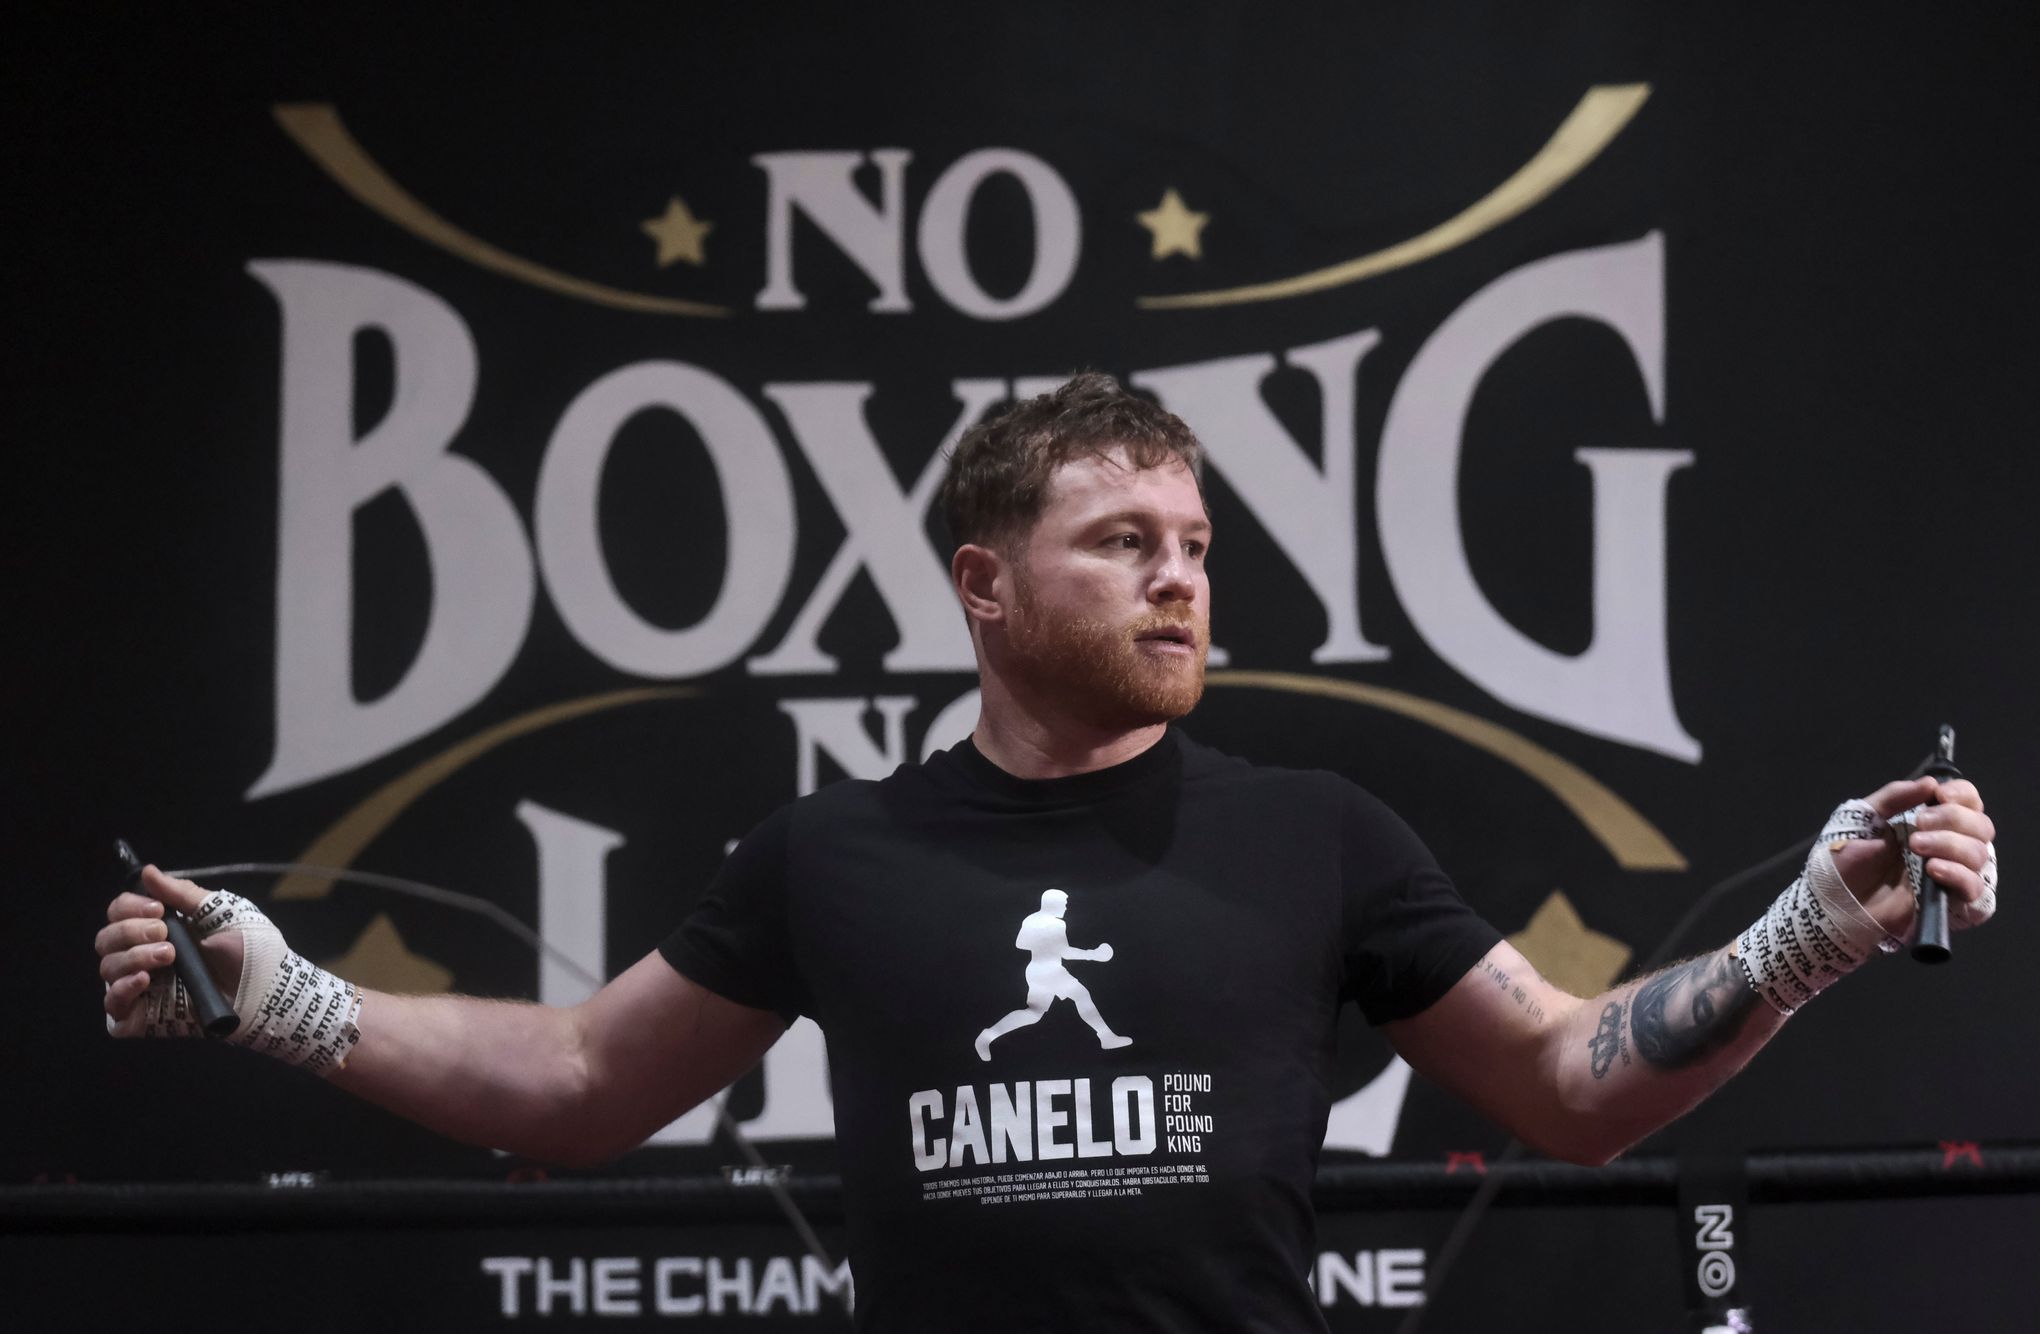 You will see, and you will learn': Everything Canelo said to